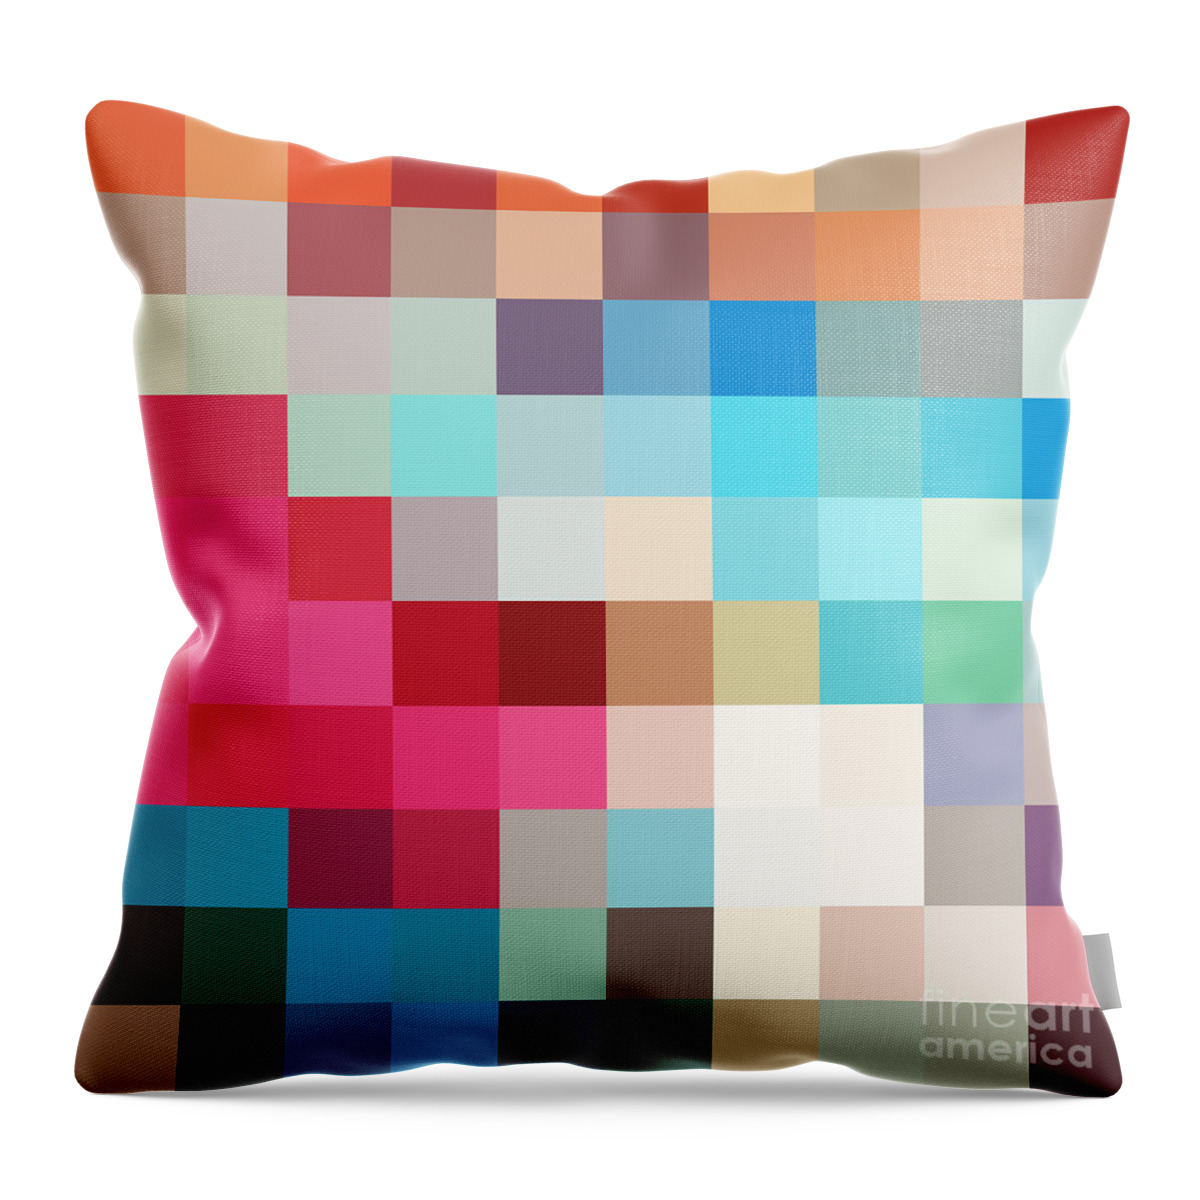 Pixel Throw Pillow featuring the digital art Pixel art 2 by Delphimages Photo Creations